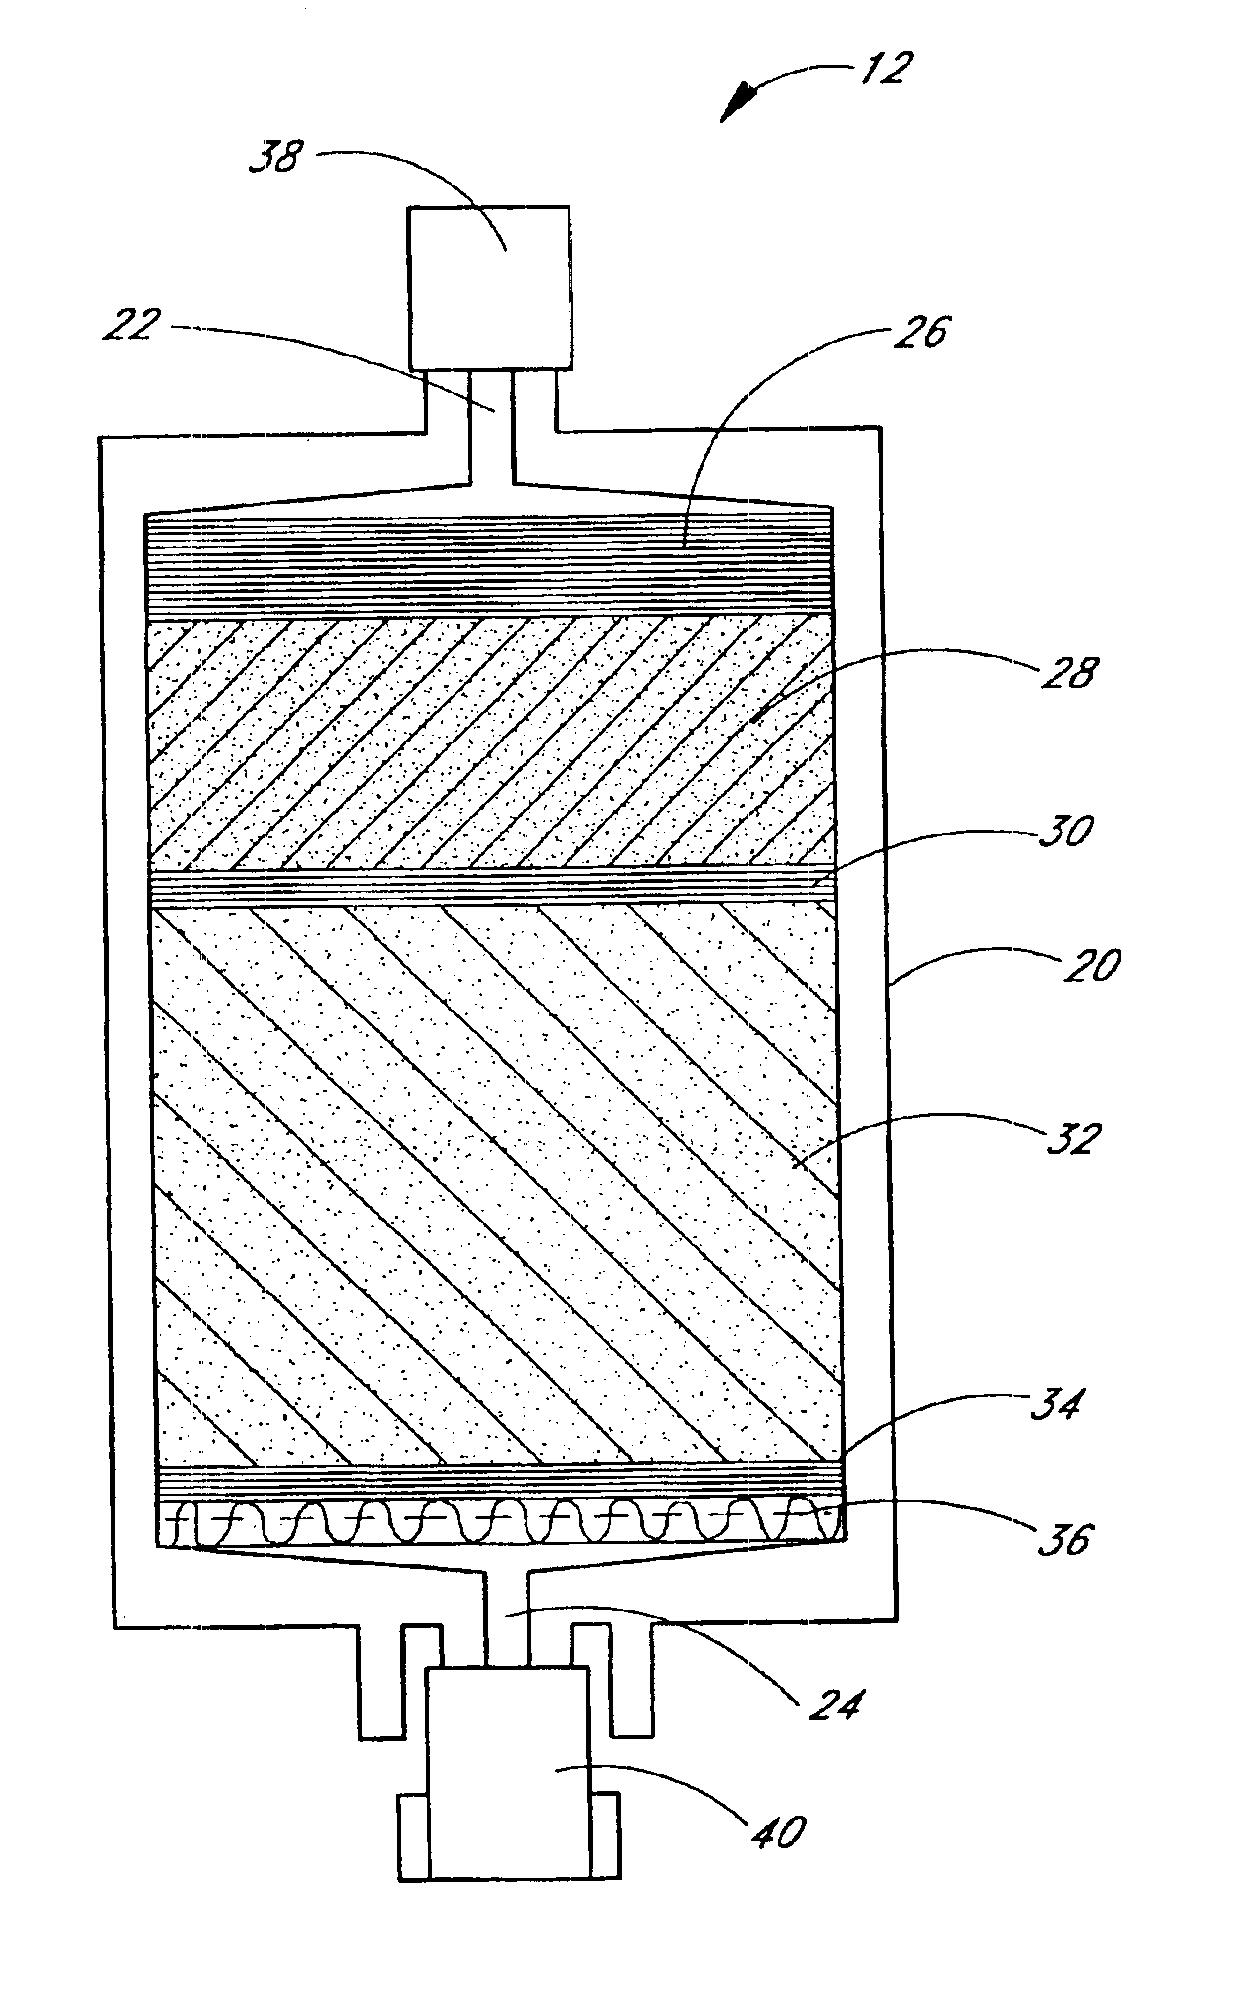 Apparatus and method for preparation of a peritoneal dialysis solution